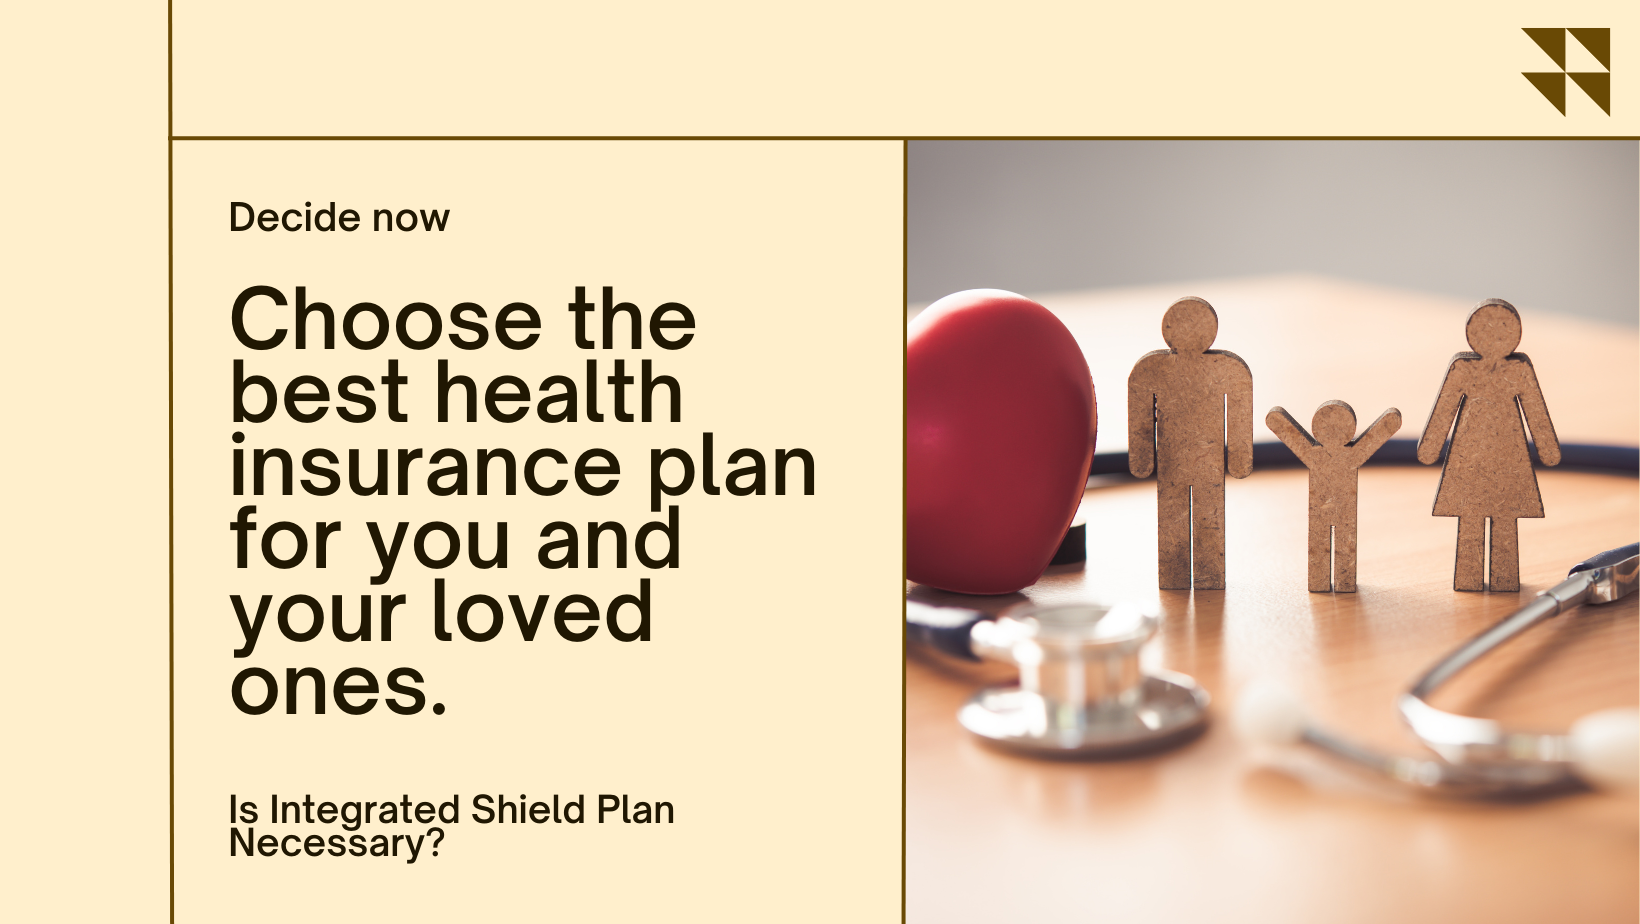 Decide now - Is Integrated Shield Plan Necessary